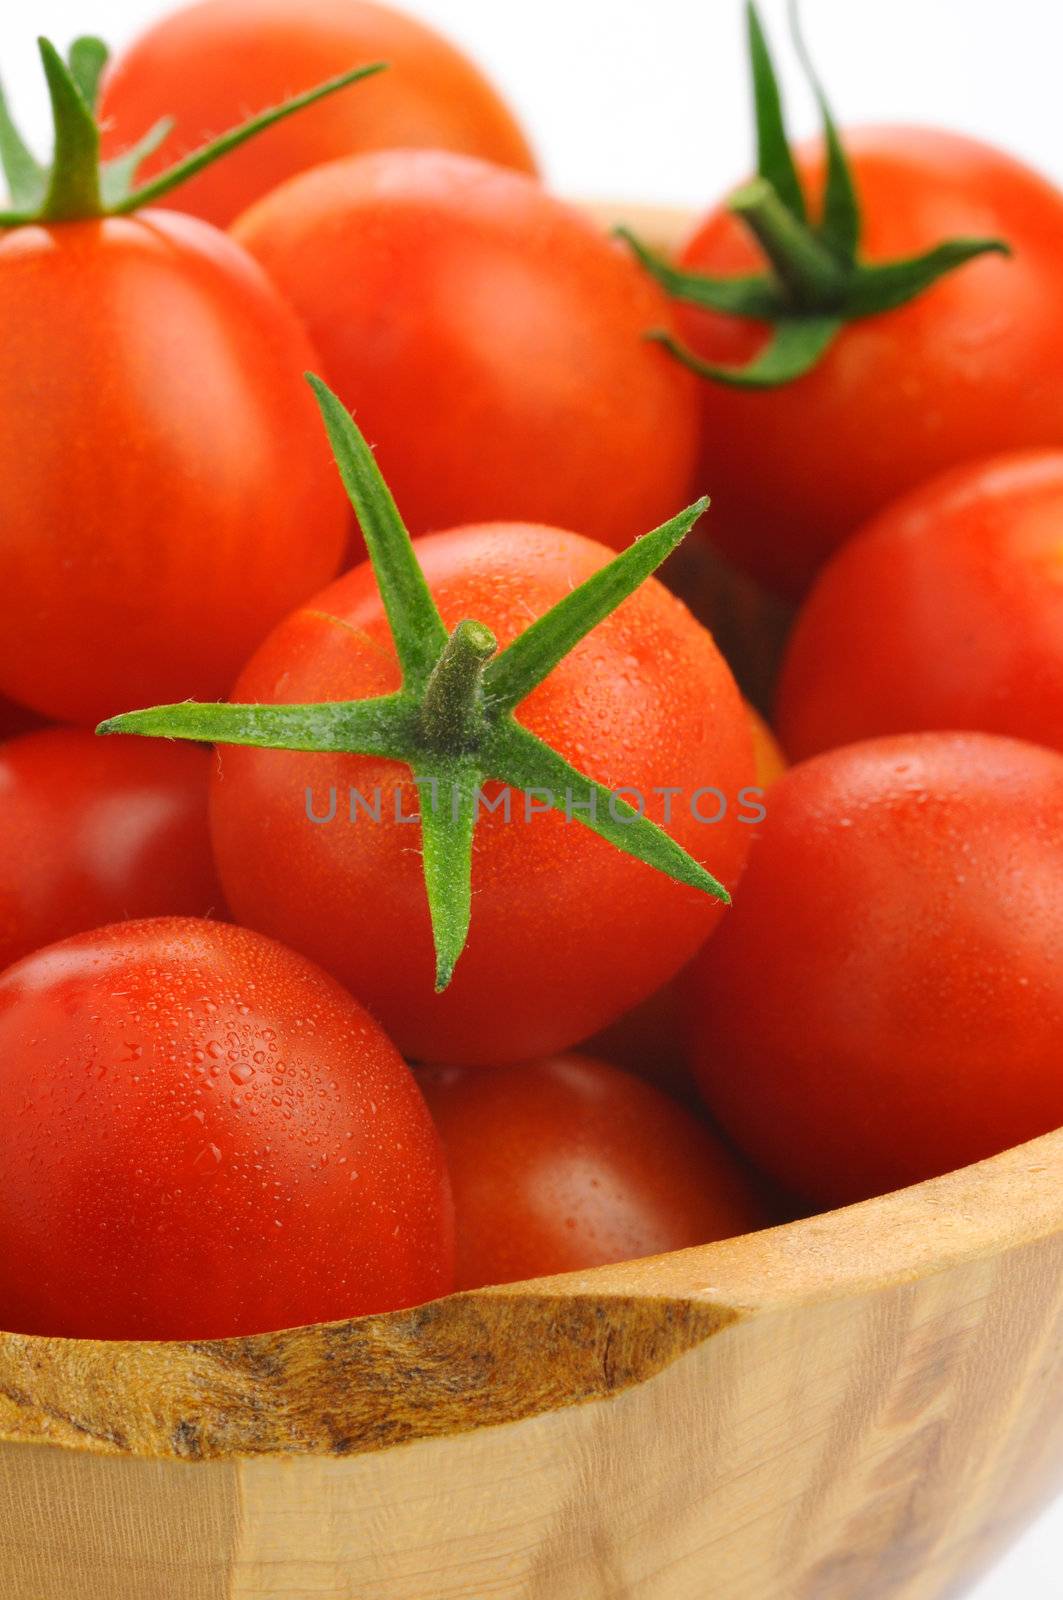 Fresh Tomatoes by billberryphotography